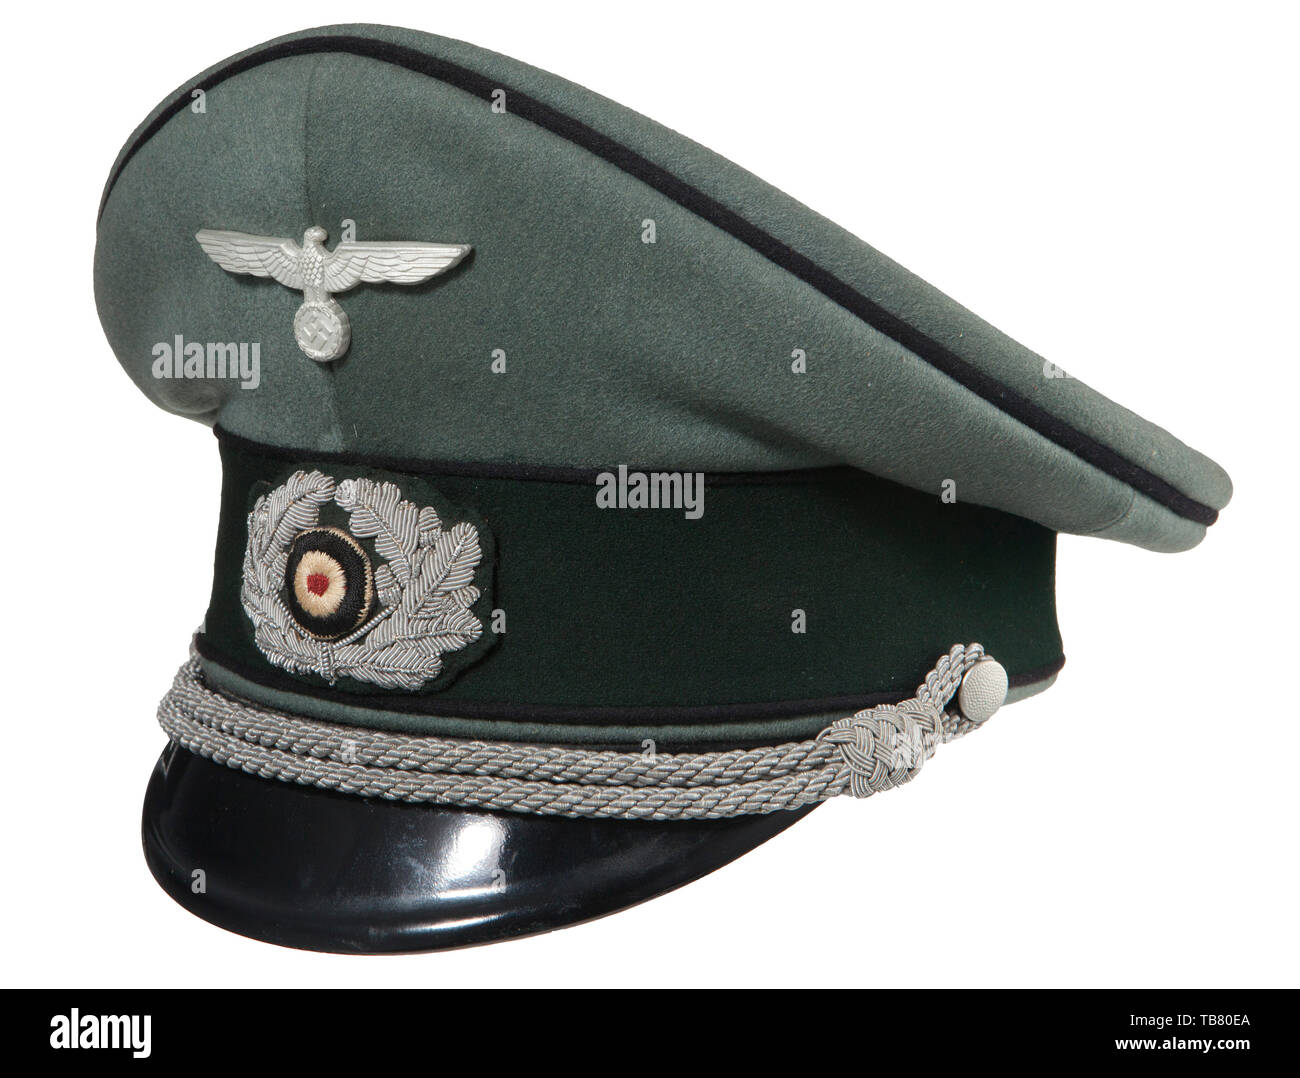 THE JOHN PEPERA COLLECTION, A Visor Hat for Officers of the Army, Pioneers, Field grey doe skin wool, dark green wool centre band, black wool piping, aluminium eagle, applied silver wire wreath with woven cockade, aluminium chin cords retained with pebbled side buttons, black lacquered visor, heavily damaged leather sweatband, grey silk interior lining, intact moisture shield with imprinted manufacturer's logo with GI written note of capture 'Kaptain Wilhelm Von ...., Rhineland 1945'., Editorial-Use-Only Stock Photo